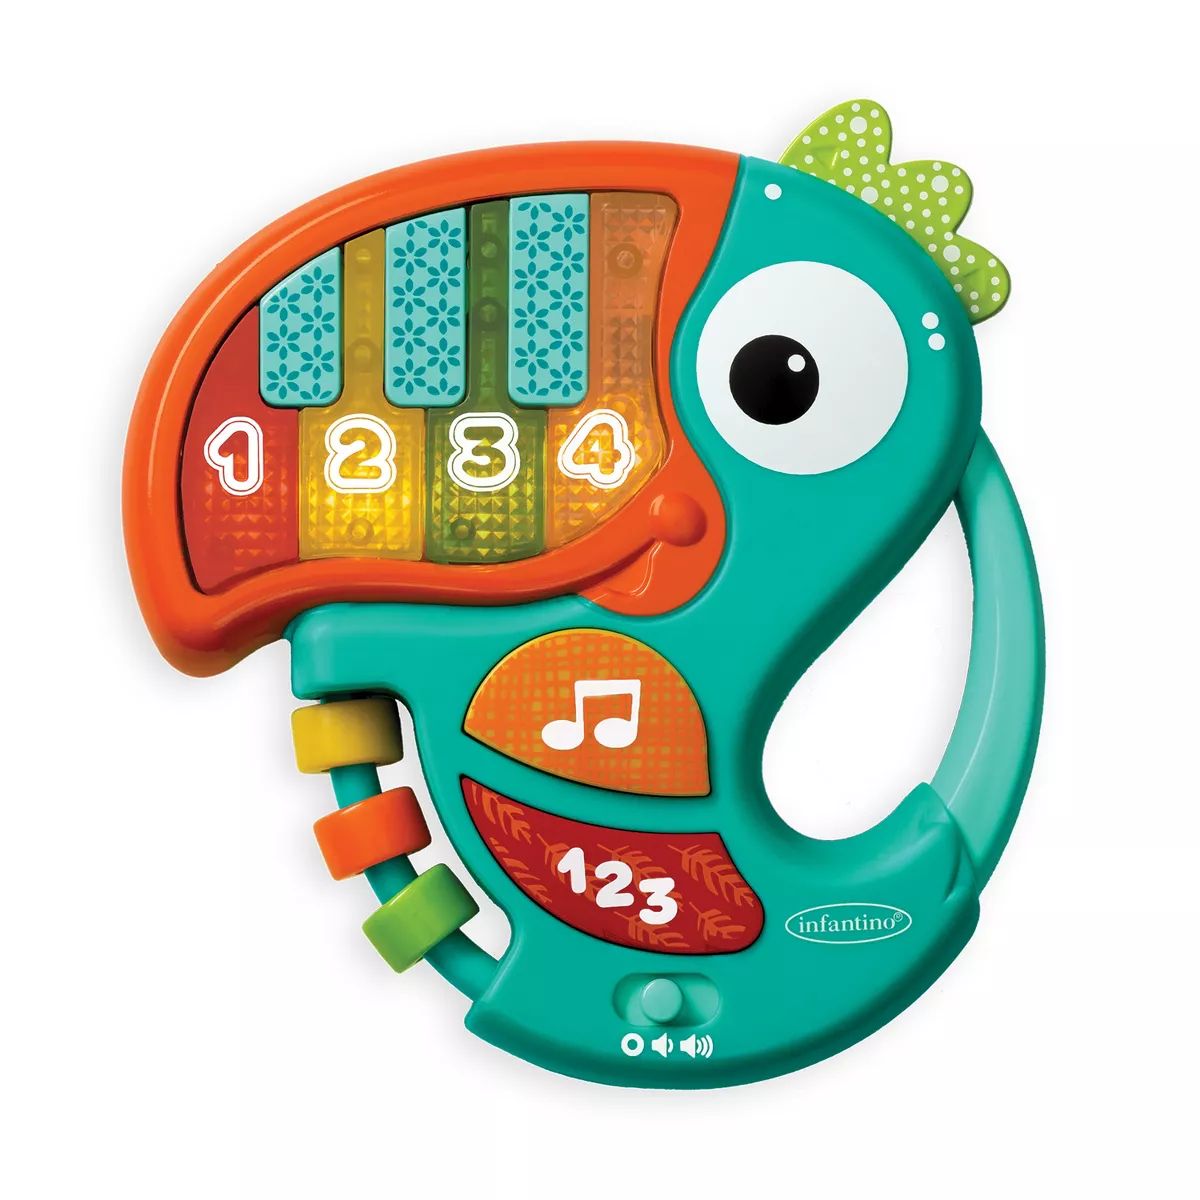 Infantino Go gaga! Piano & Numbers Learning Toucan | Target